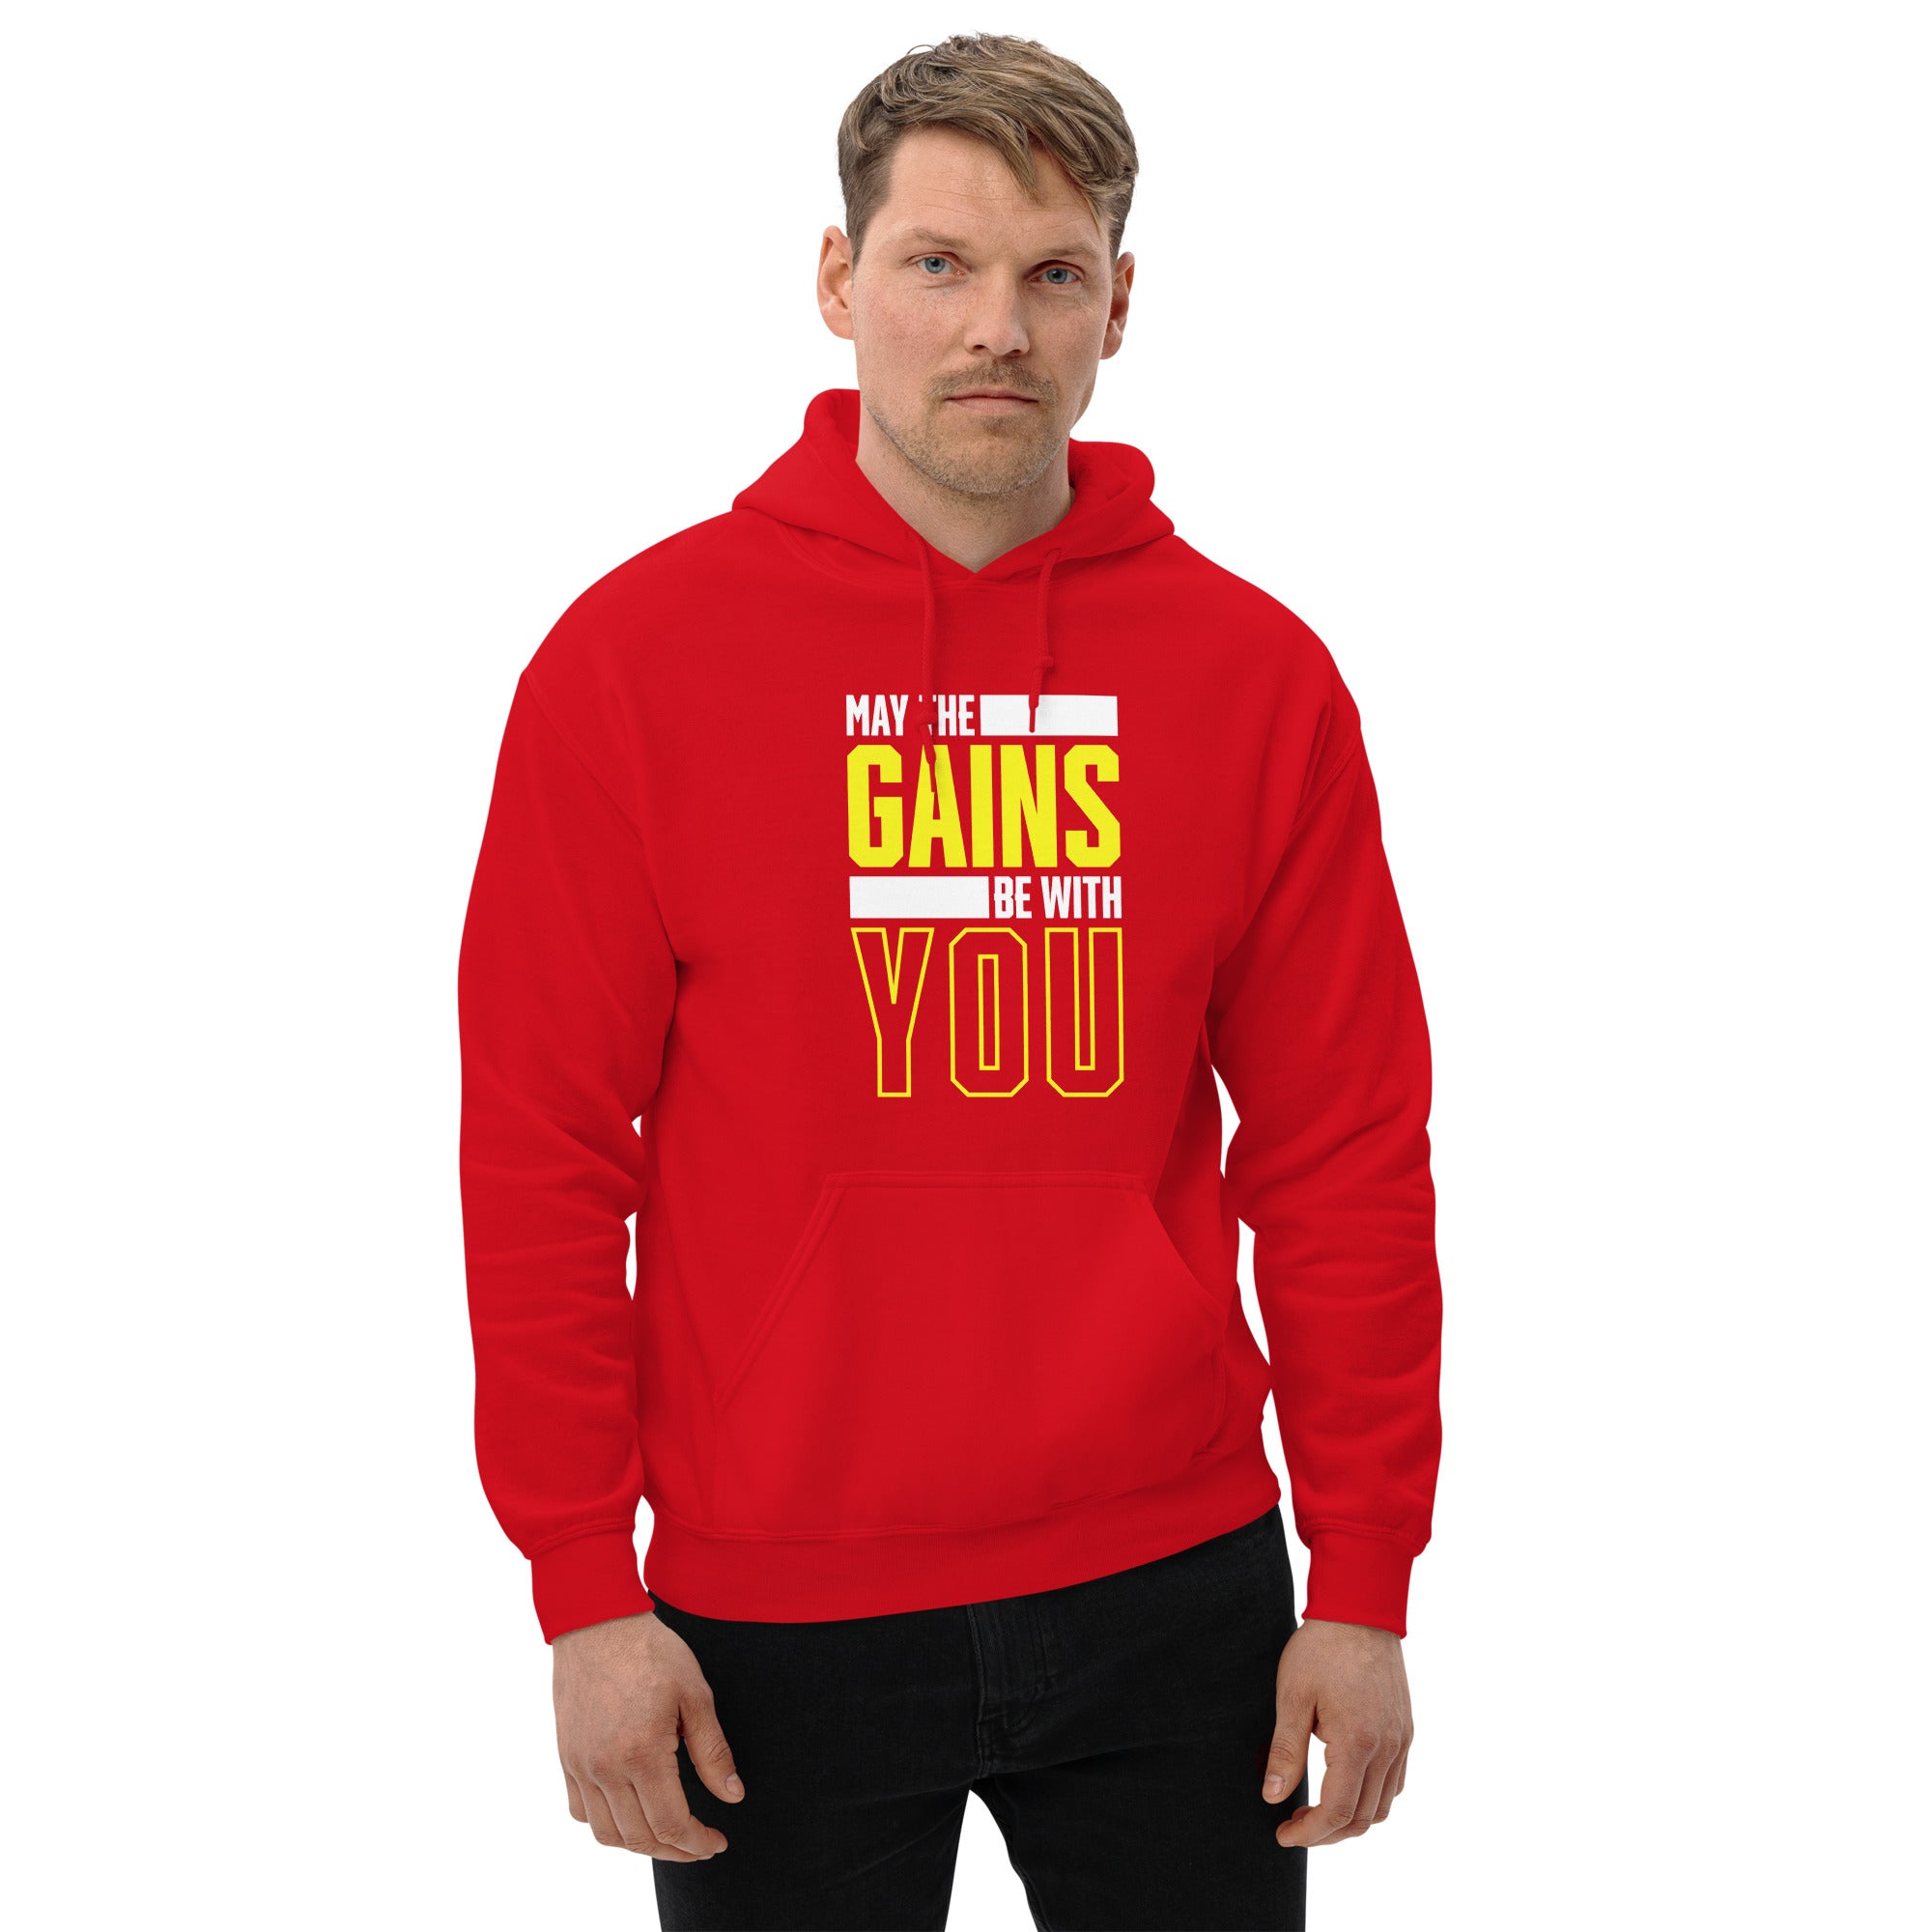 May The Gains Be With You Funny Workout Fitness Gym Men's Hoodie